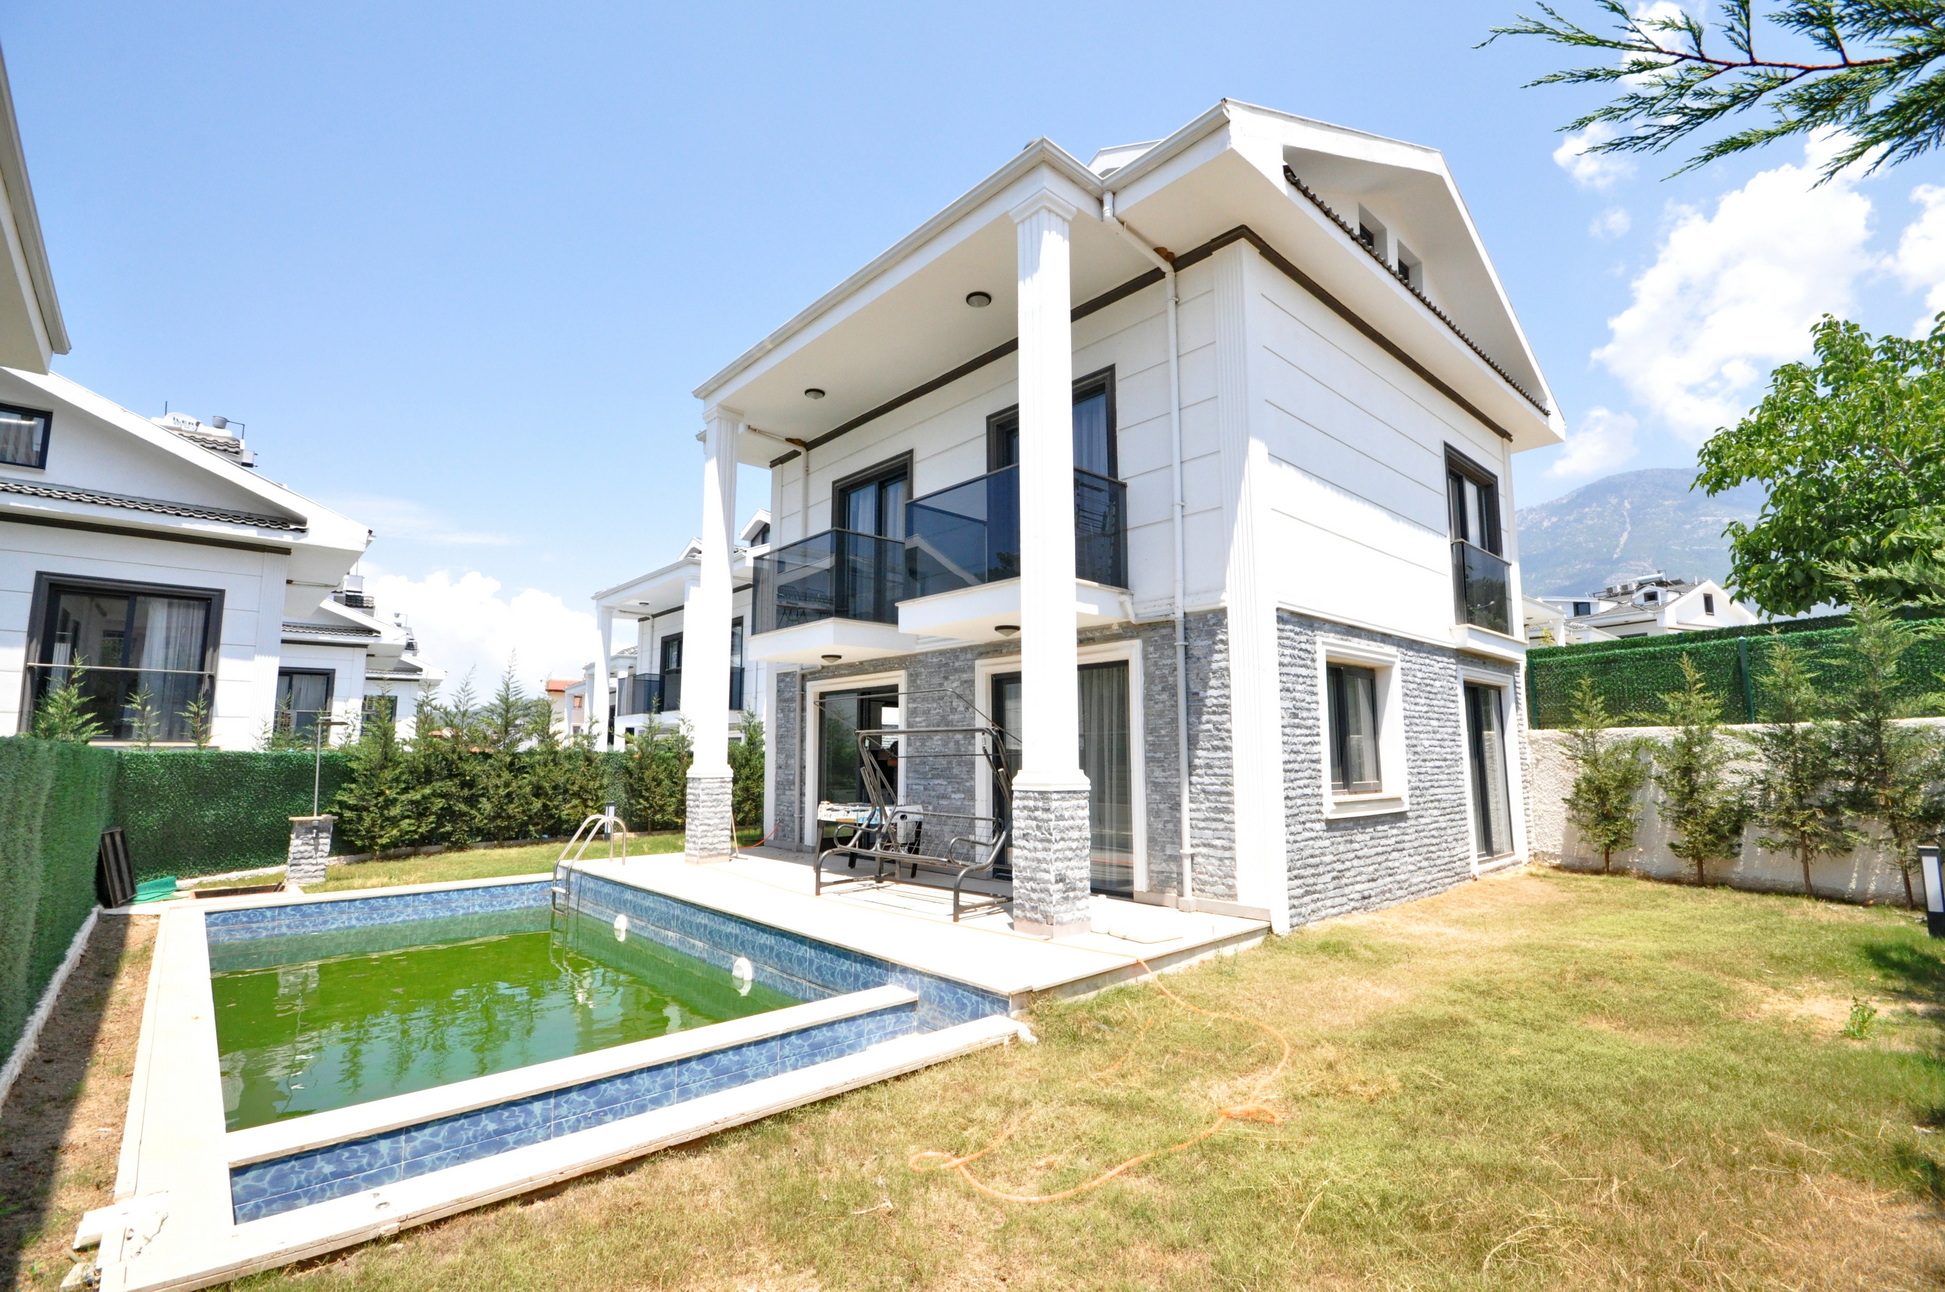 4 Bedroom Detached Villa with Private Pool and Garden in The Heart of Hisaronu